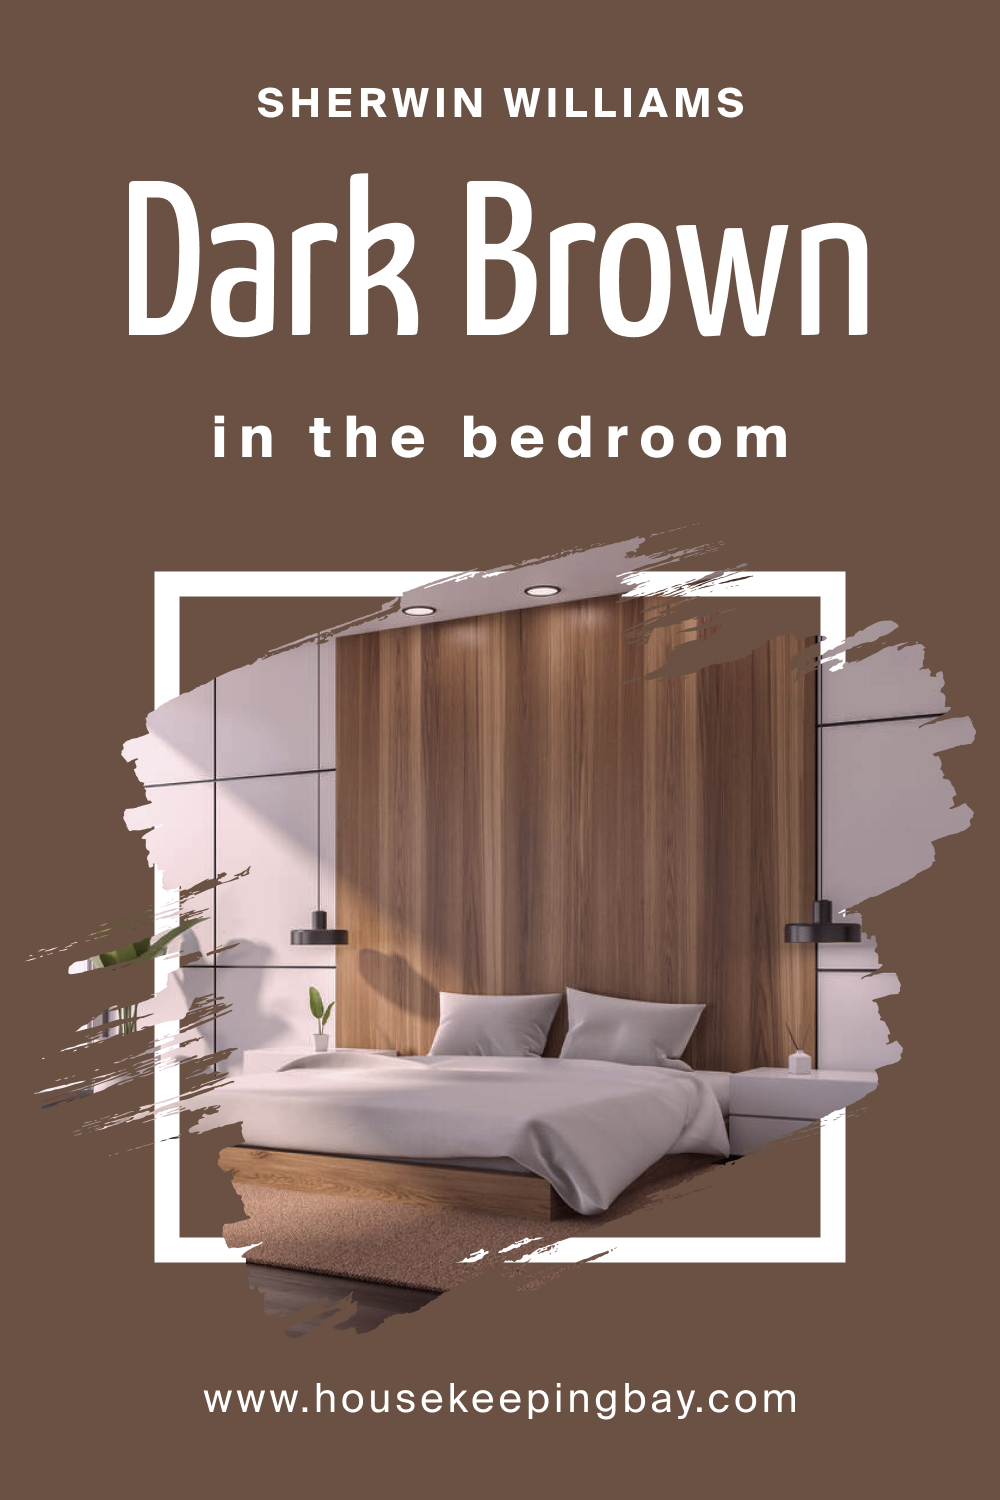 Sherwin Williams. SW 7520 Dark Brown For the bedroom